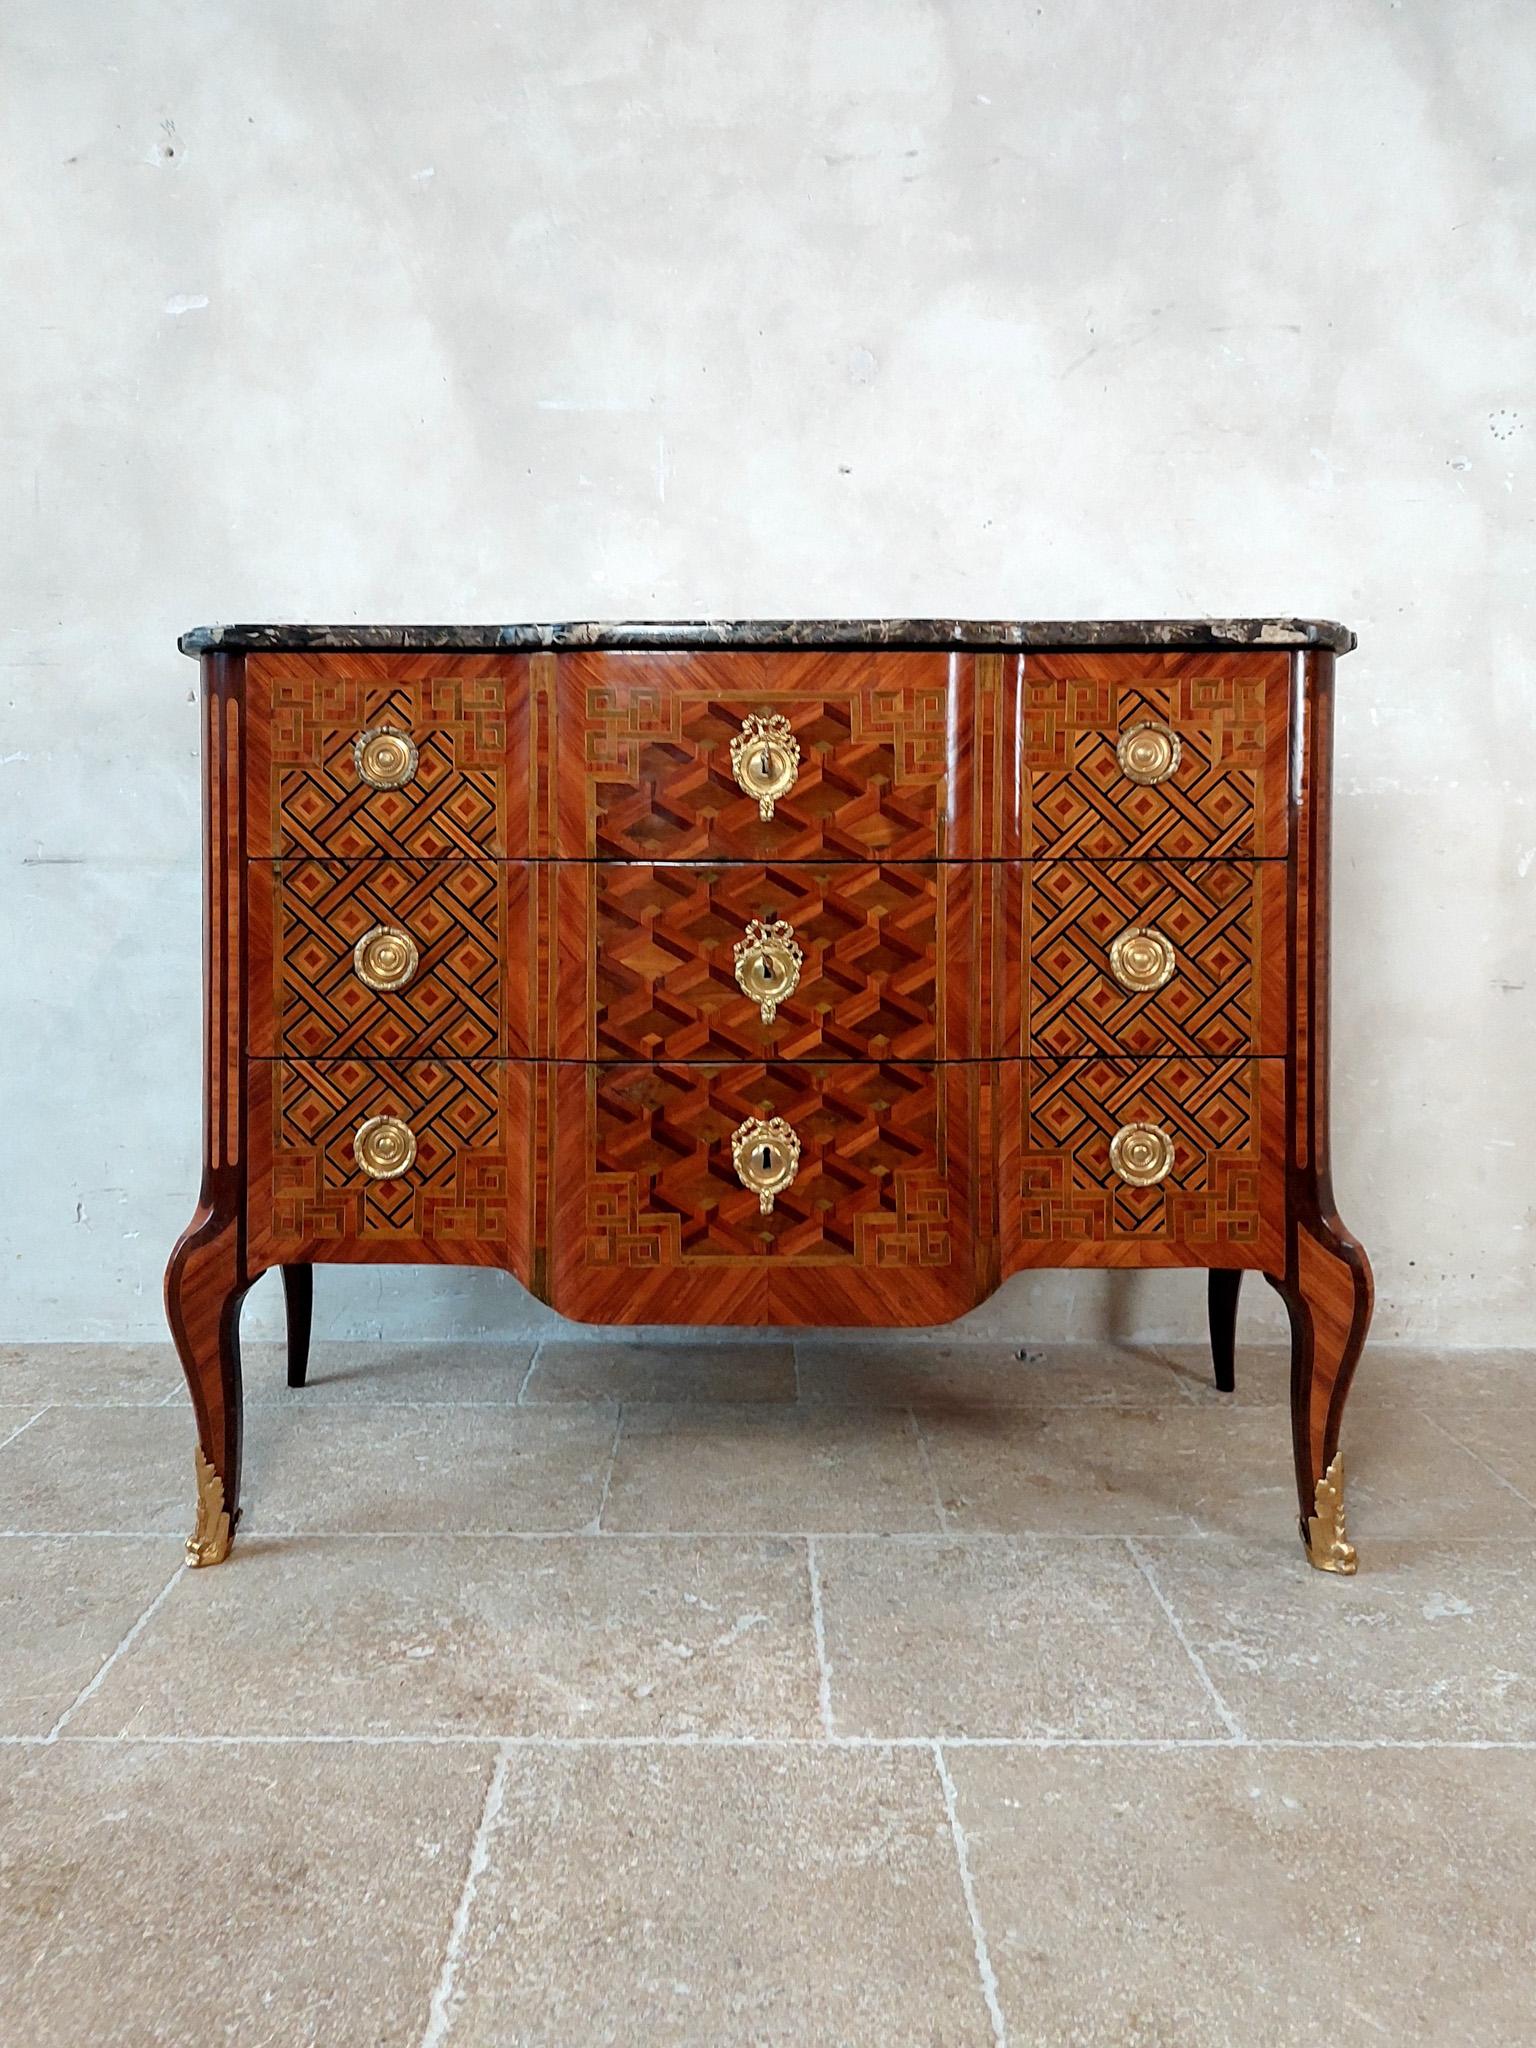 Antique intarsia oak commode with geometric patterns. Transition Louis Seize, Paris, ca. 1770. Stamped / signed under the marble top Joseph Schmitz, furniture maker or ébéniste in Paris (active as maître from June 18, 1761 to his death in 1782 on